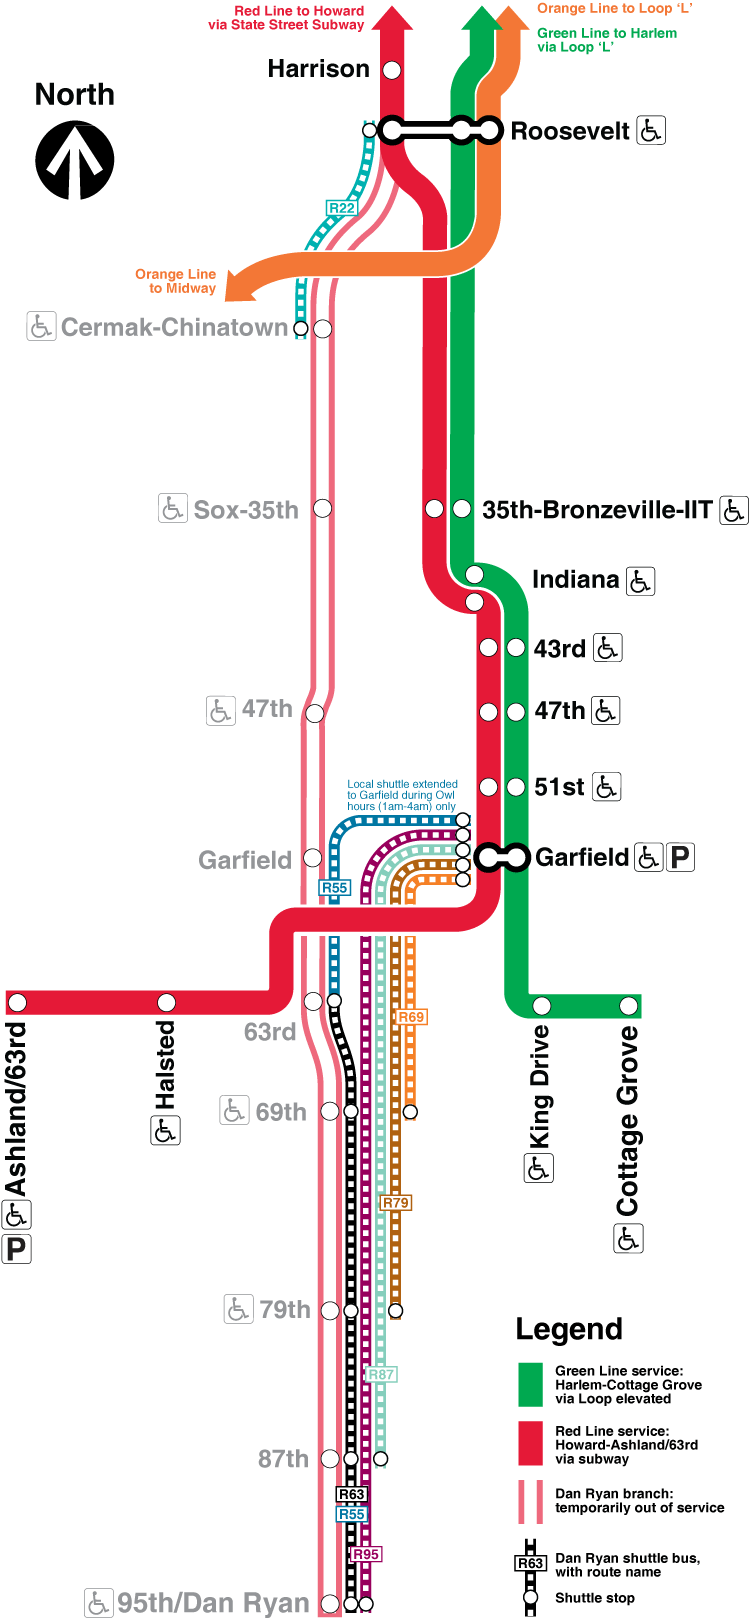 A map of how the Red Line operated between May 19, 2013 and October 20, 2013. Map comes from the Chicago CTA.